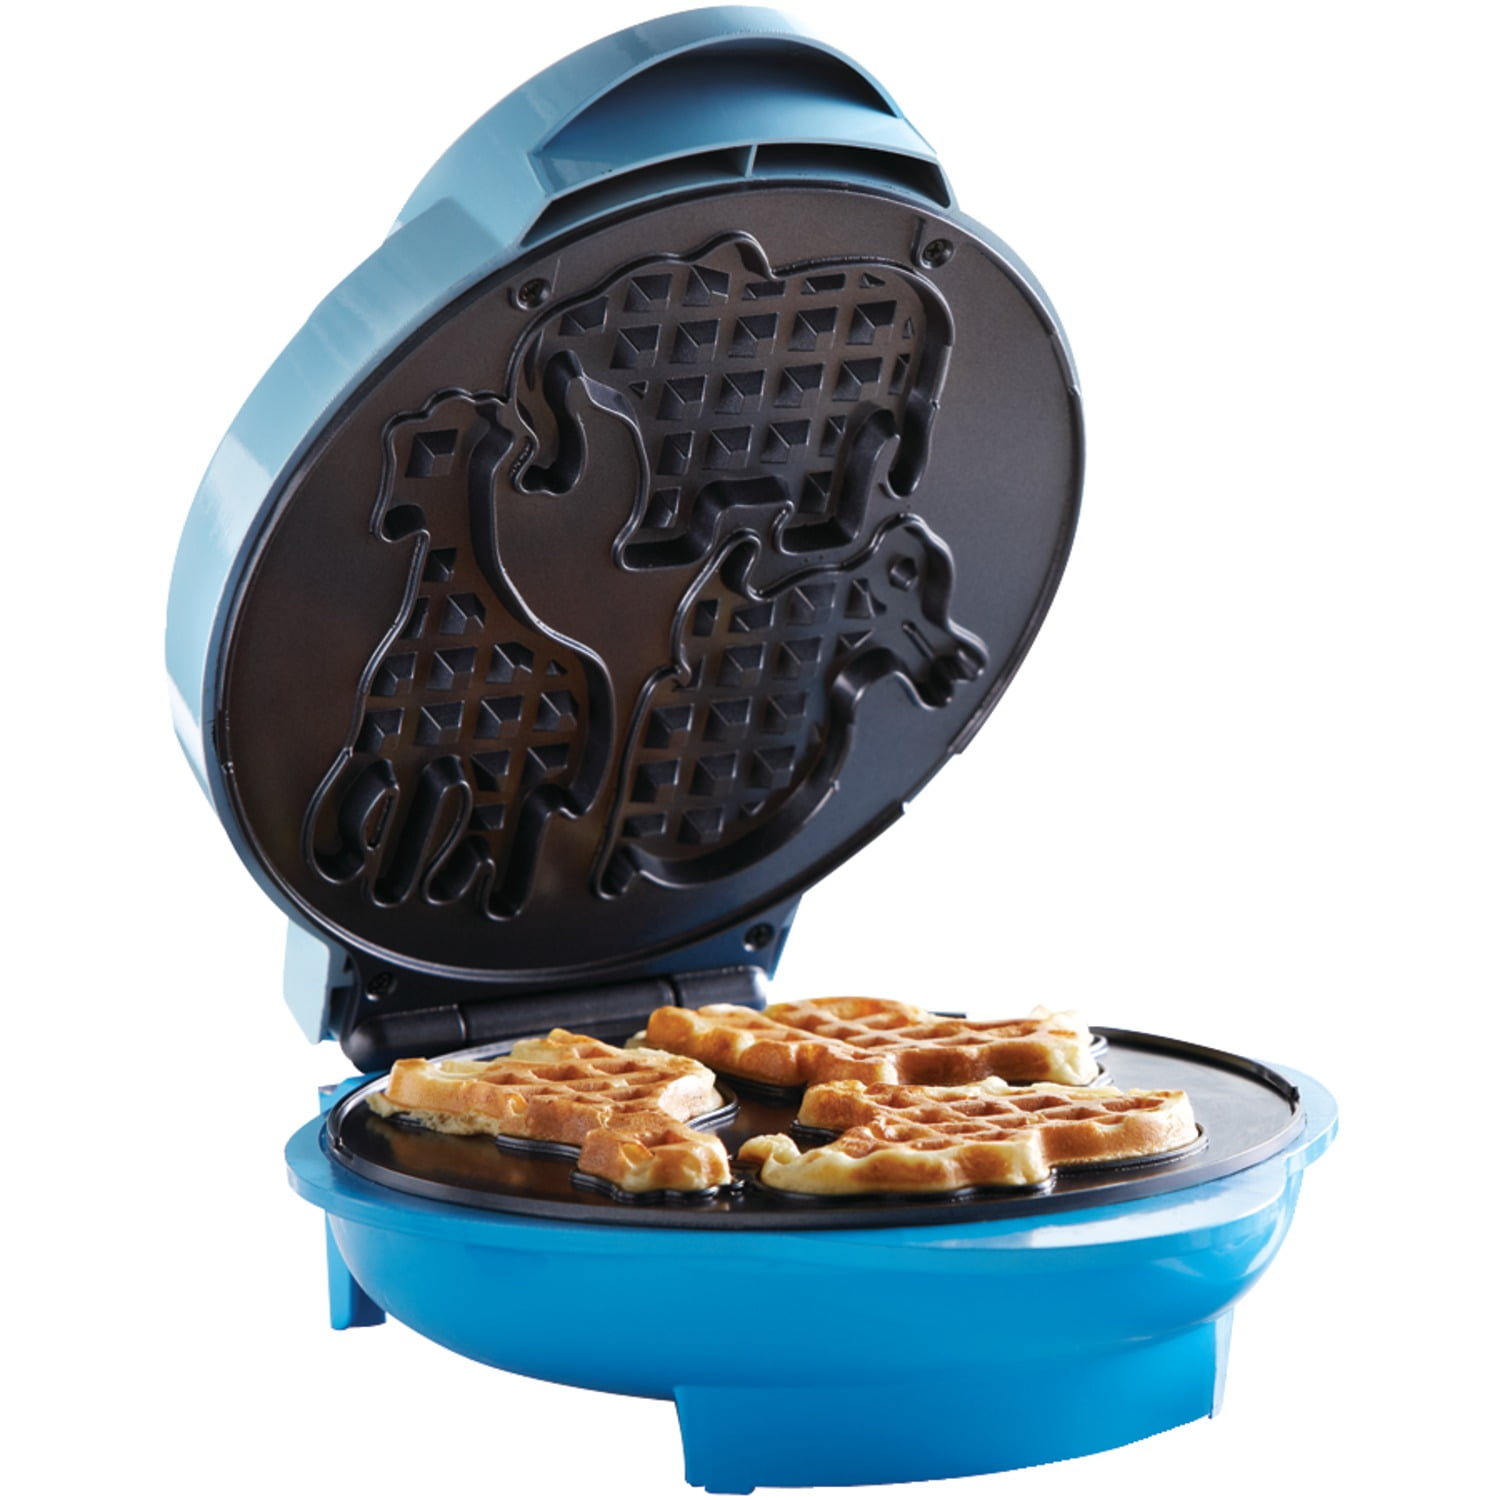 Wonderffle - Stuffed Waffle Iron, Belgian Waffle Maker, Dual Nonstick Pans,  Cool-to-the-Touch Handles, Gas and Electric Stovetop Compatible Waffle  Maker, 5 inch Dia, 2 inch Thick Waffles: Home & Kitchen 